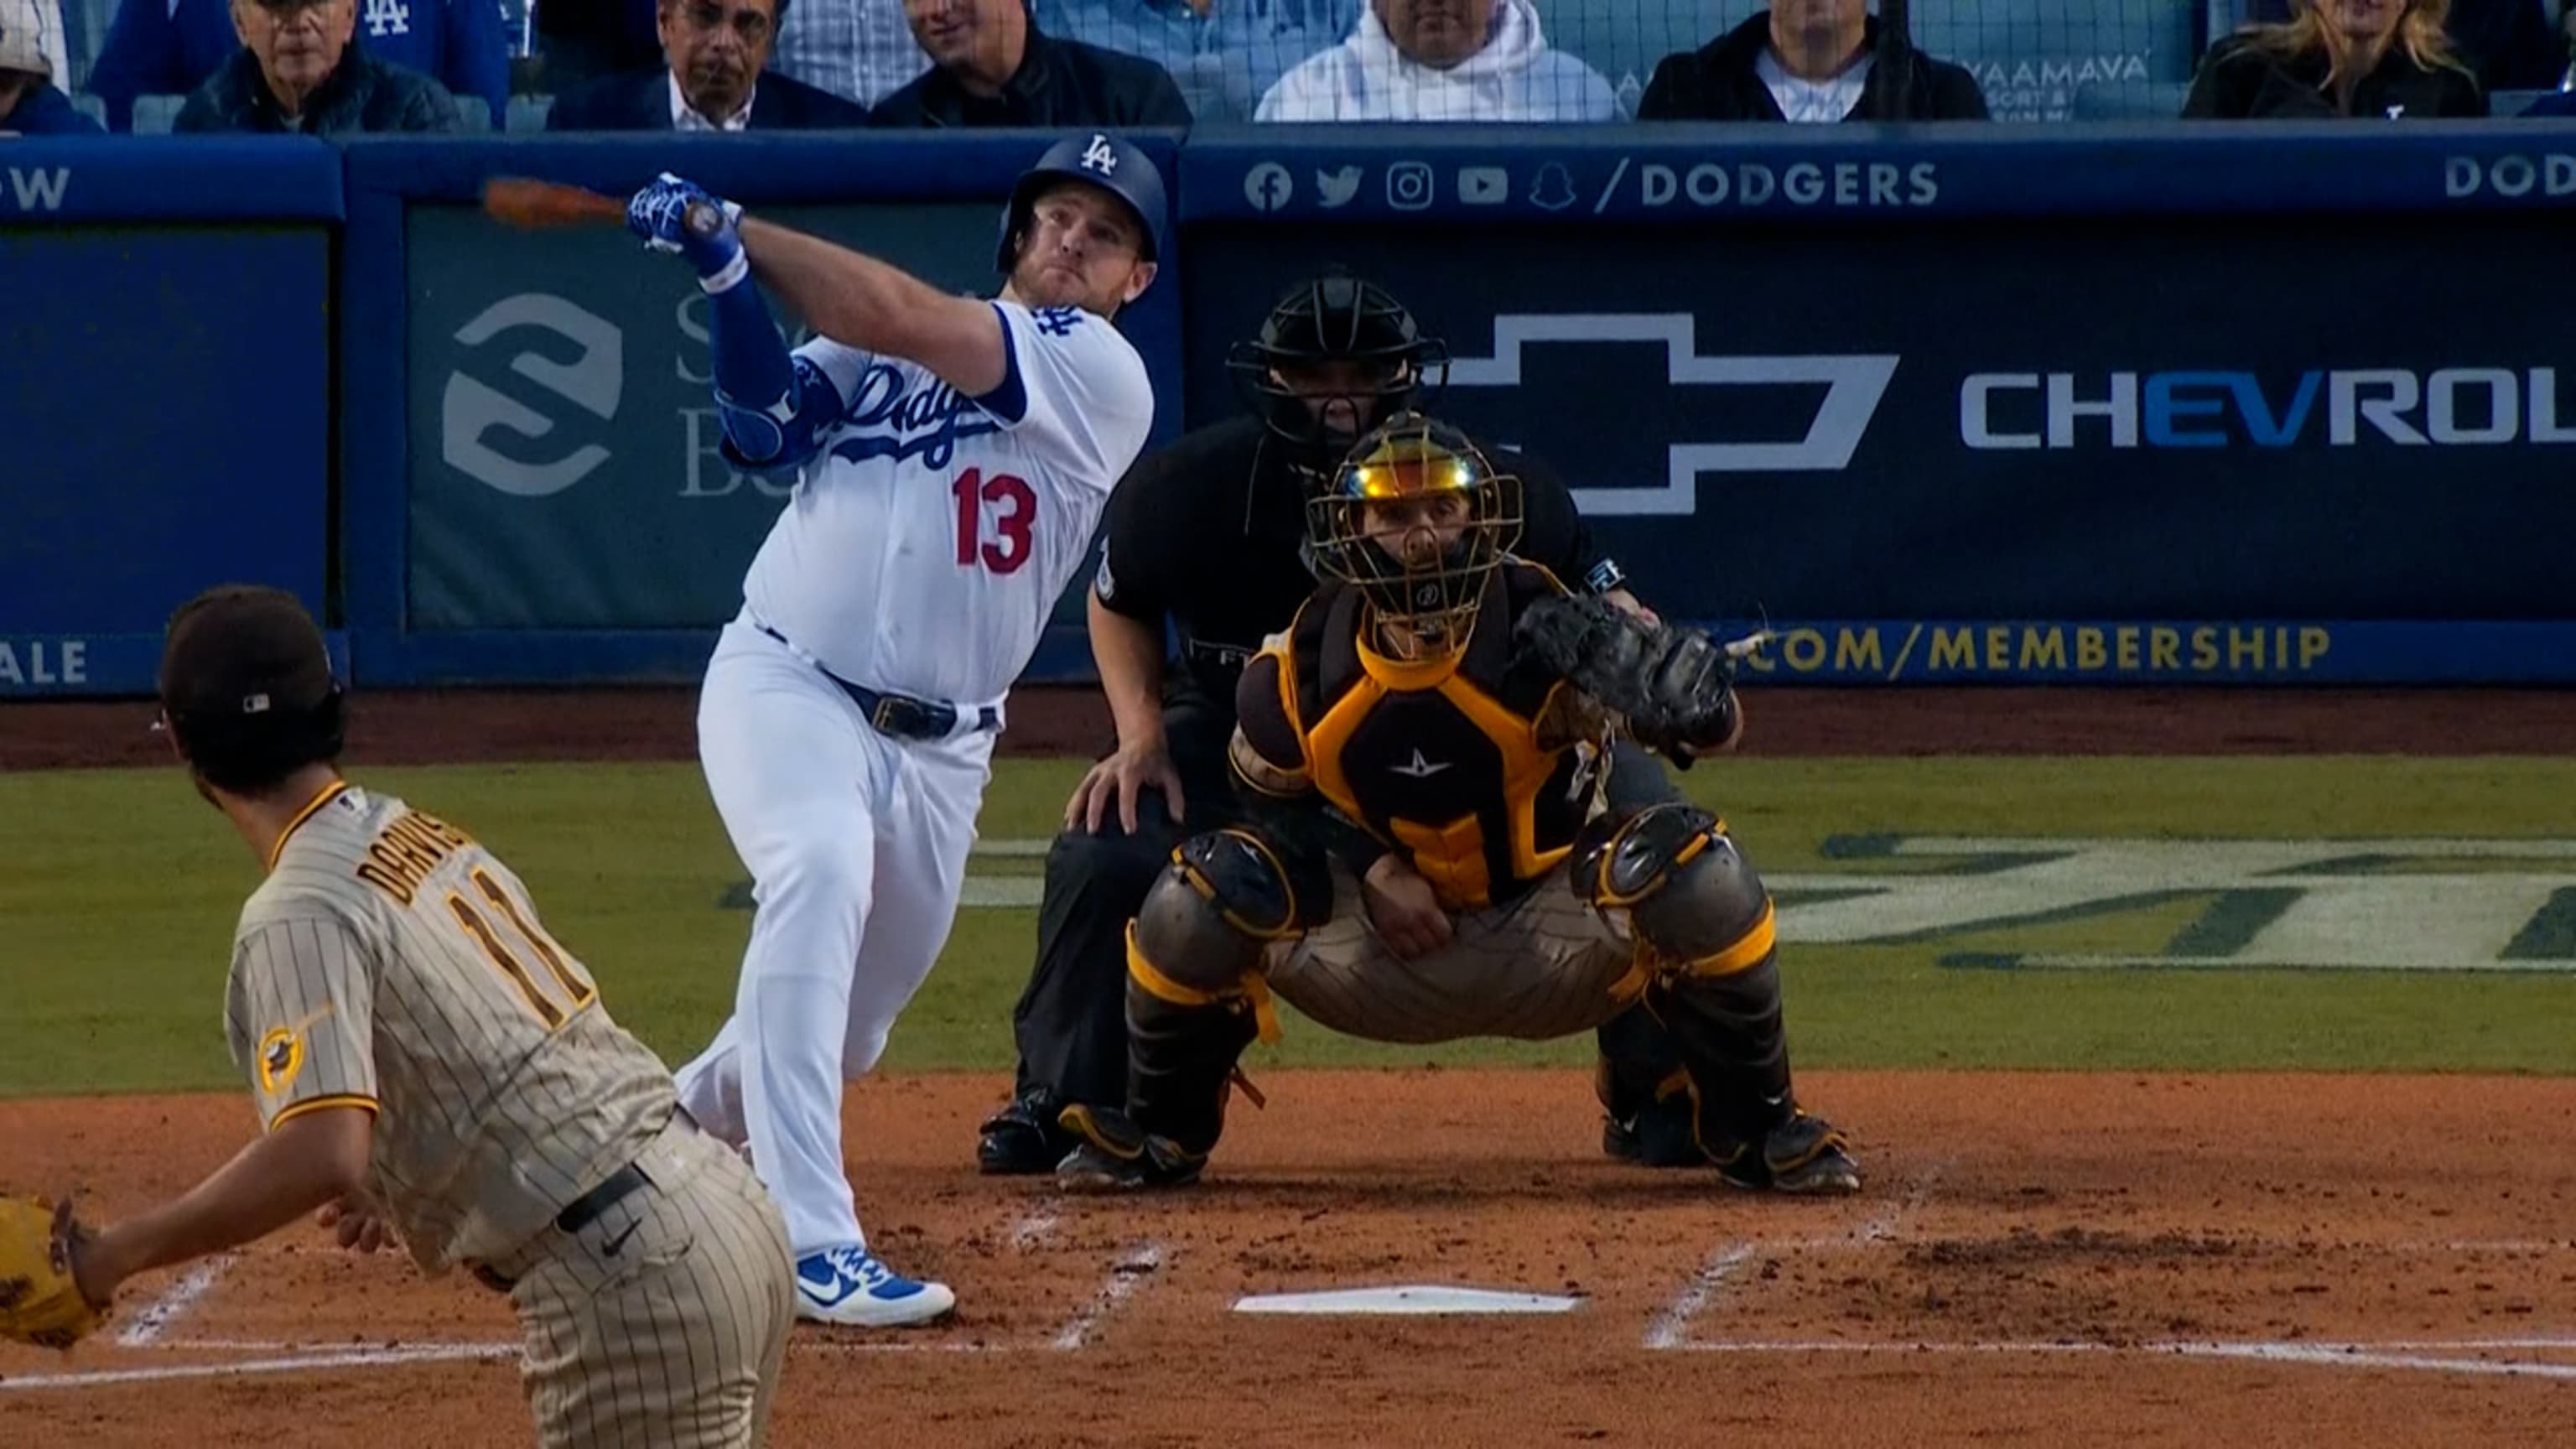 Bellinger robs Padres as Dodgers hold on for 2-0 NLDS lead, Pro Sports